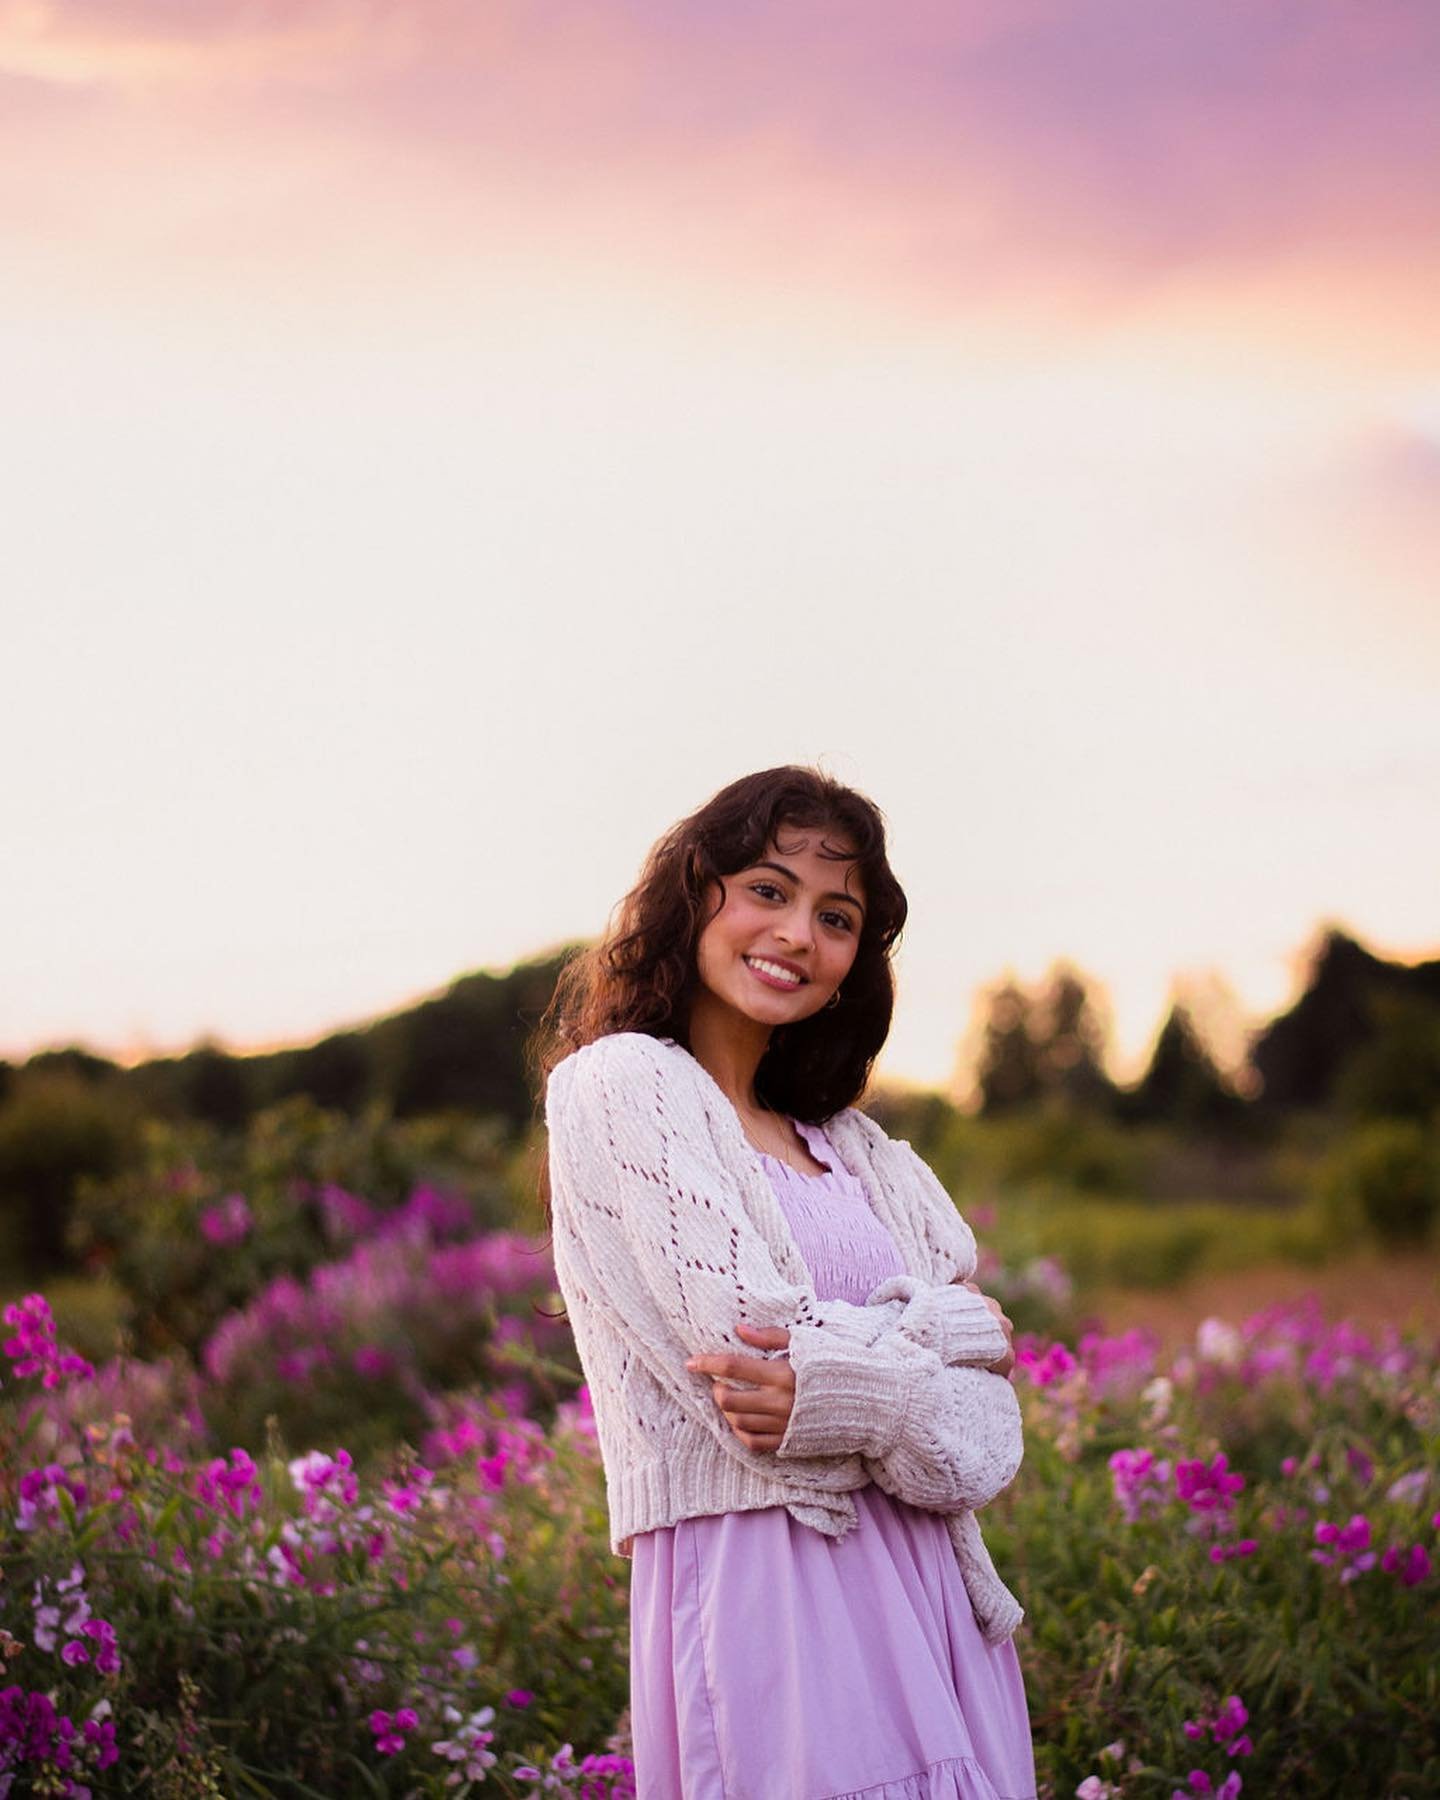 📣 NOW BOOKING WILDFLOWER MINIS ~ LIMITED SPOTS AVAILABLE~ Send me a DM to grab yours now! Or visit my website: www.sanyahphotography.com/minis to learn more📣

🌸What: 15 minute session guarantees 10 fully edited photos 
🌸When: Sunday, June 23
🌸Wh